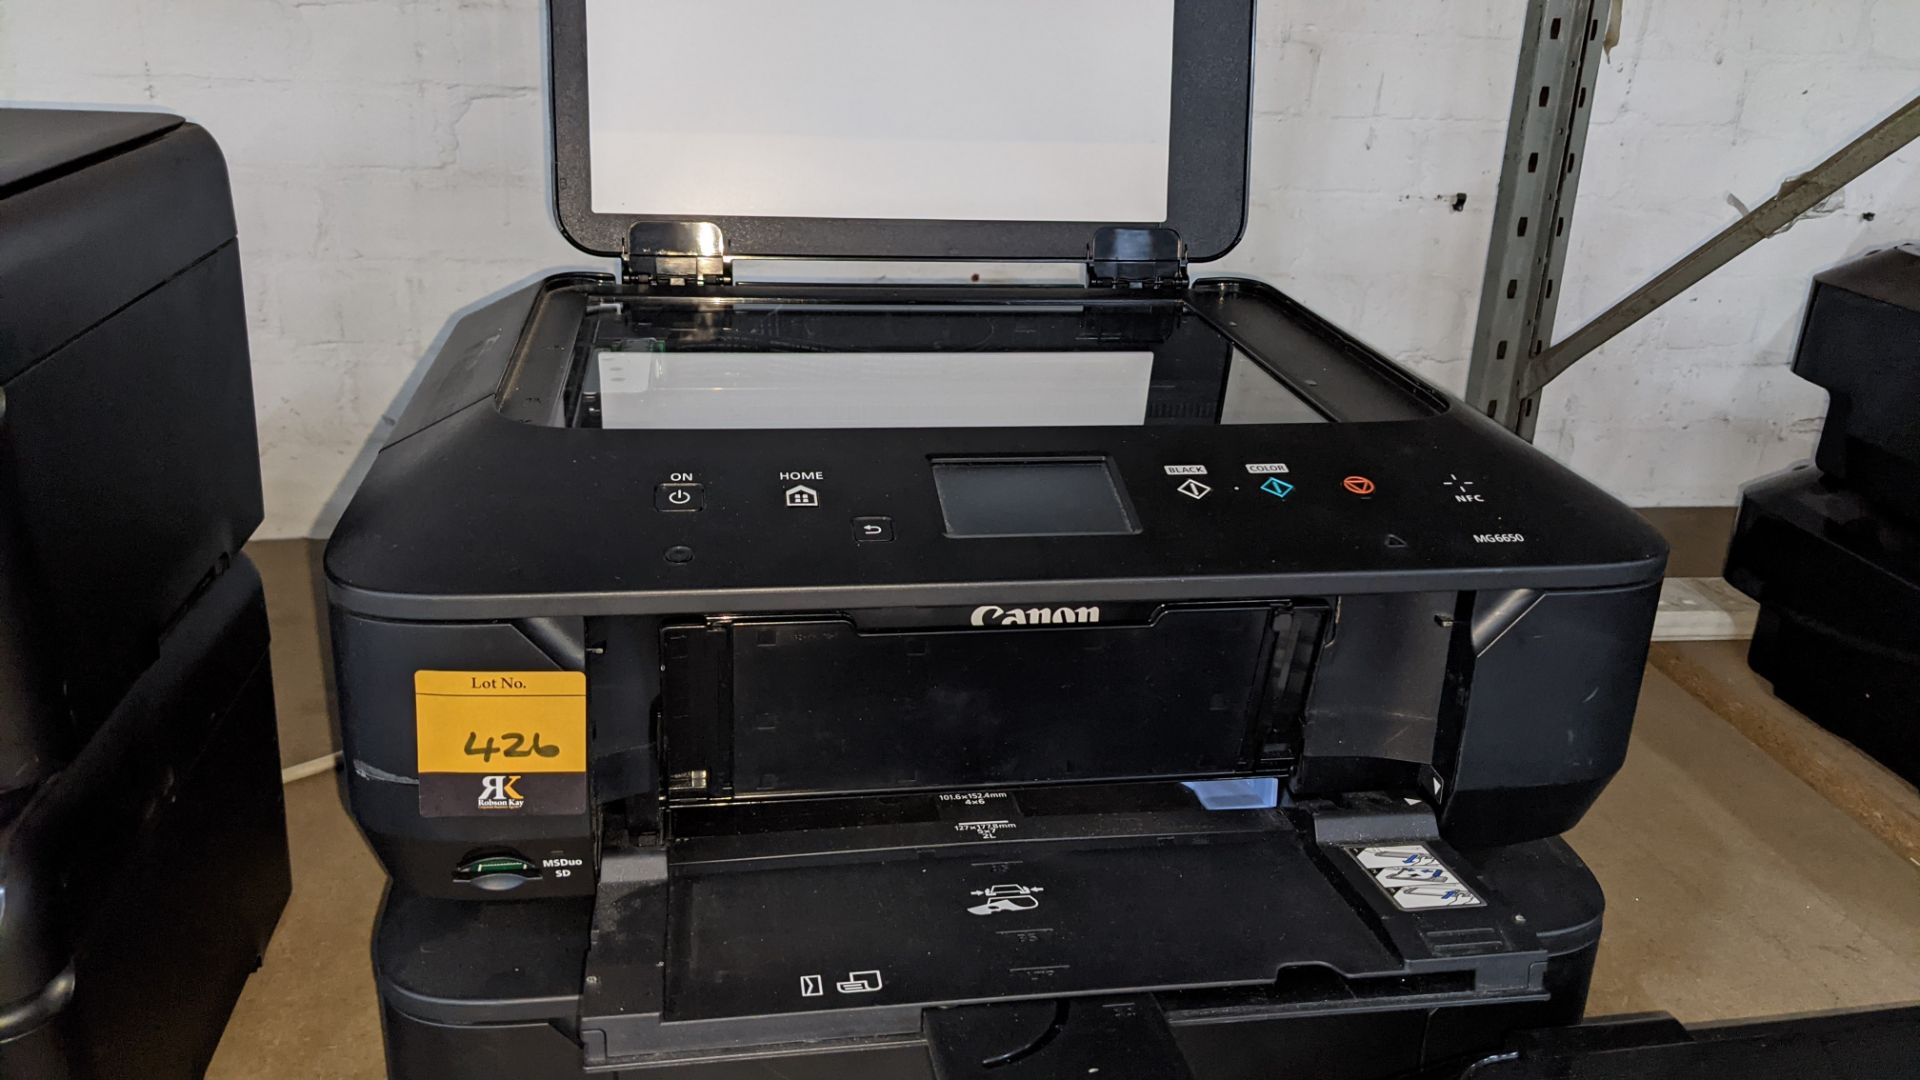 3 off Canon Pixma printers each with built-in flatbed scanners NB. No power leads & cables - Image 5 of 6